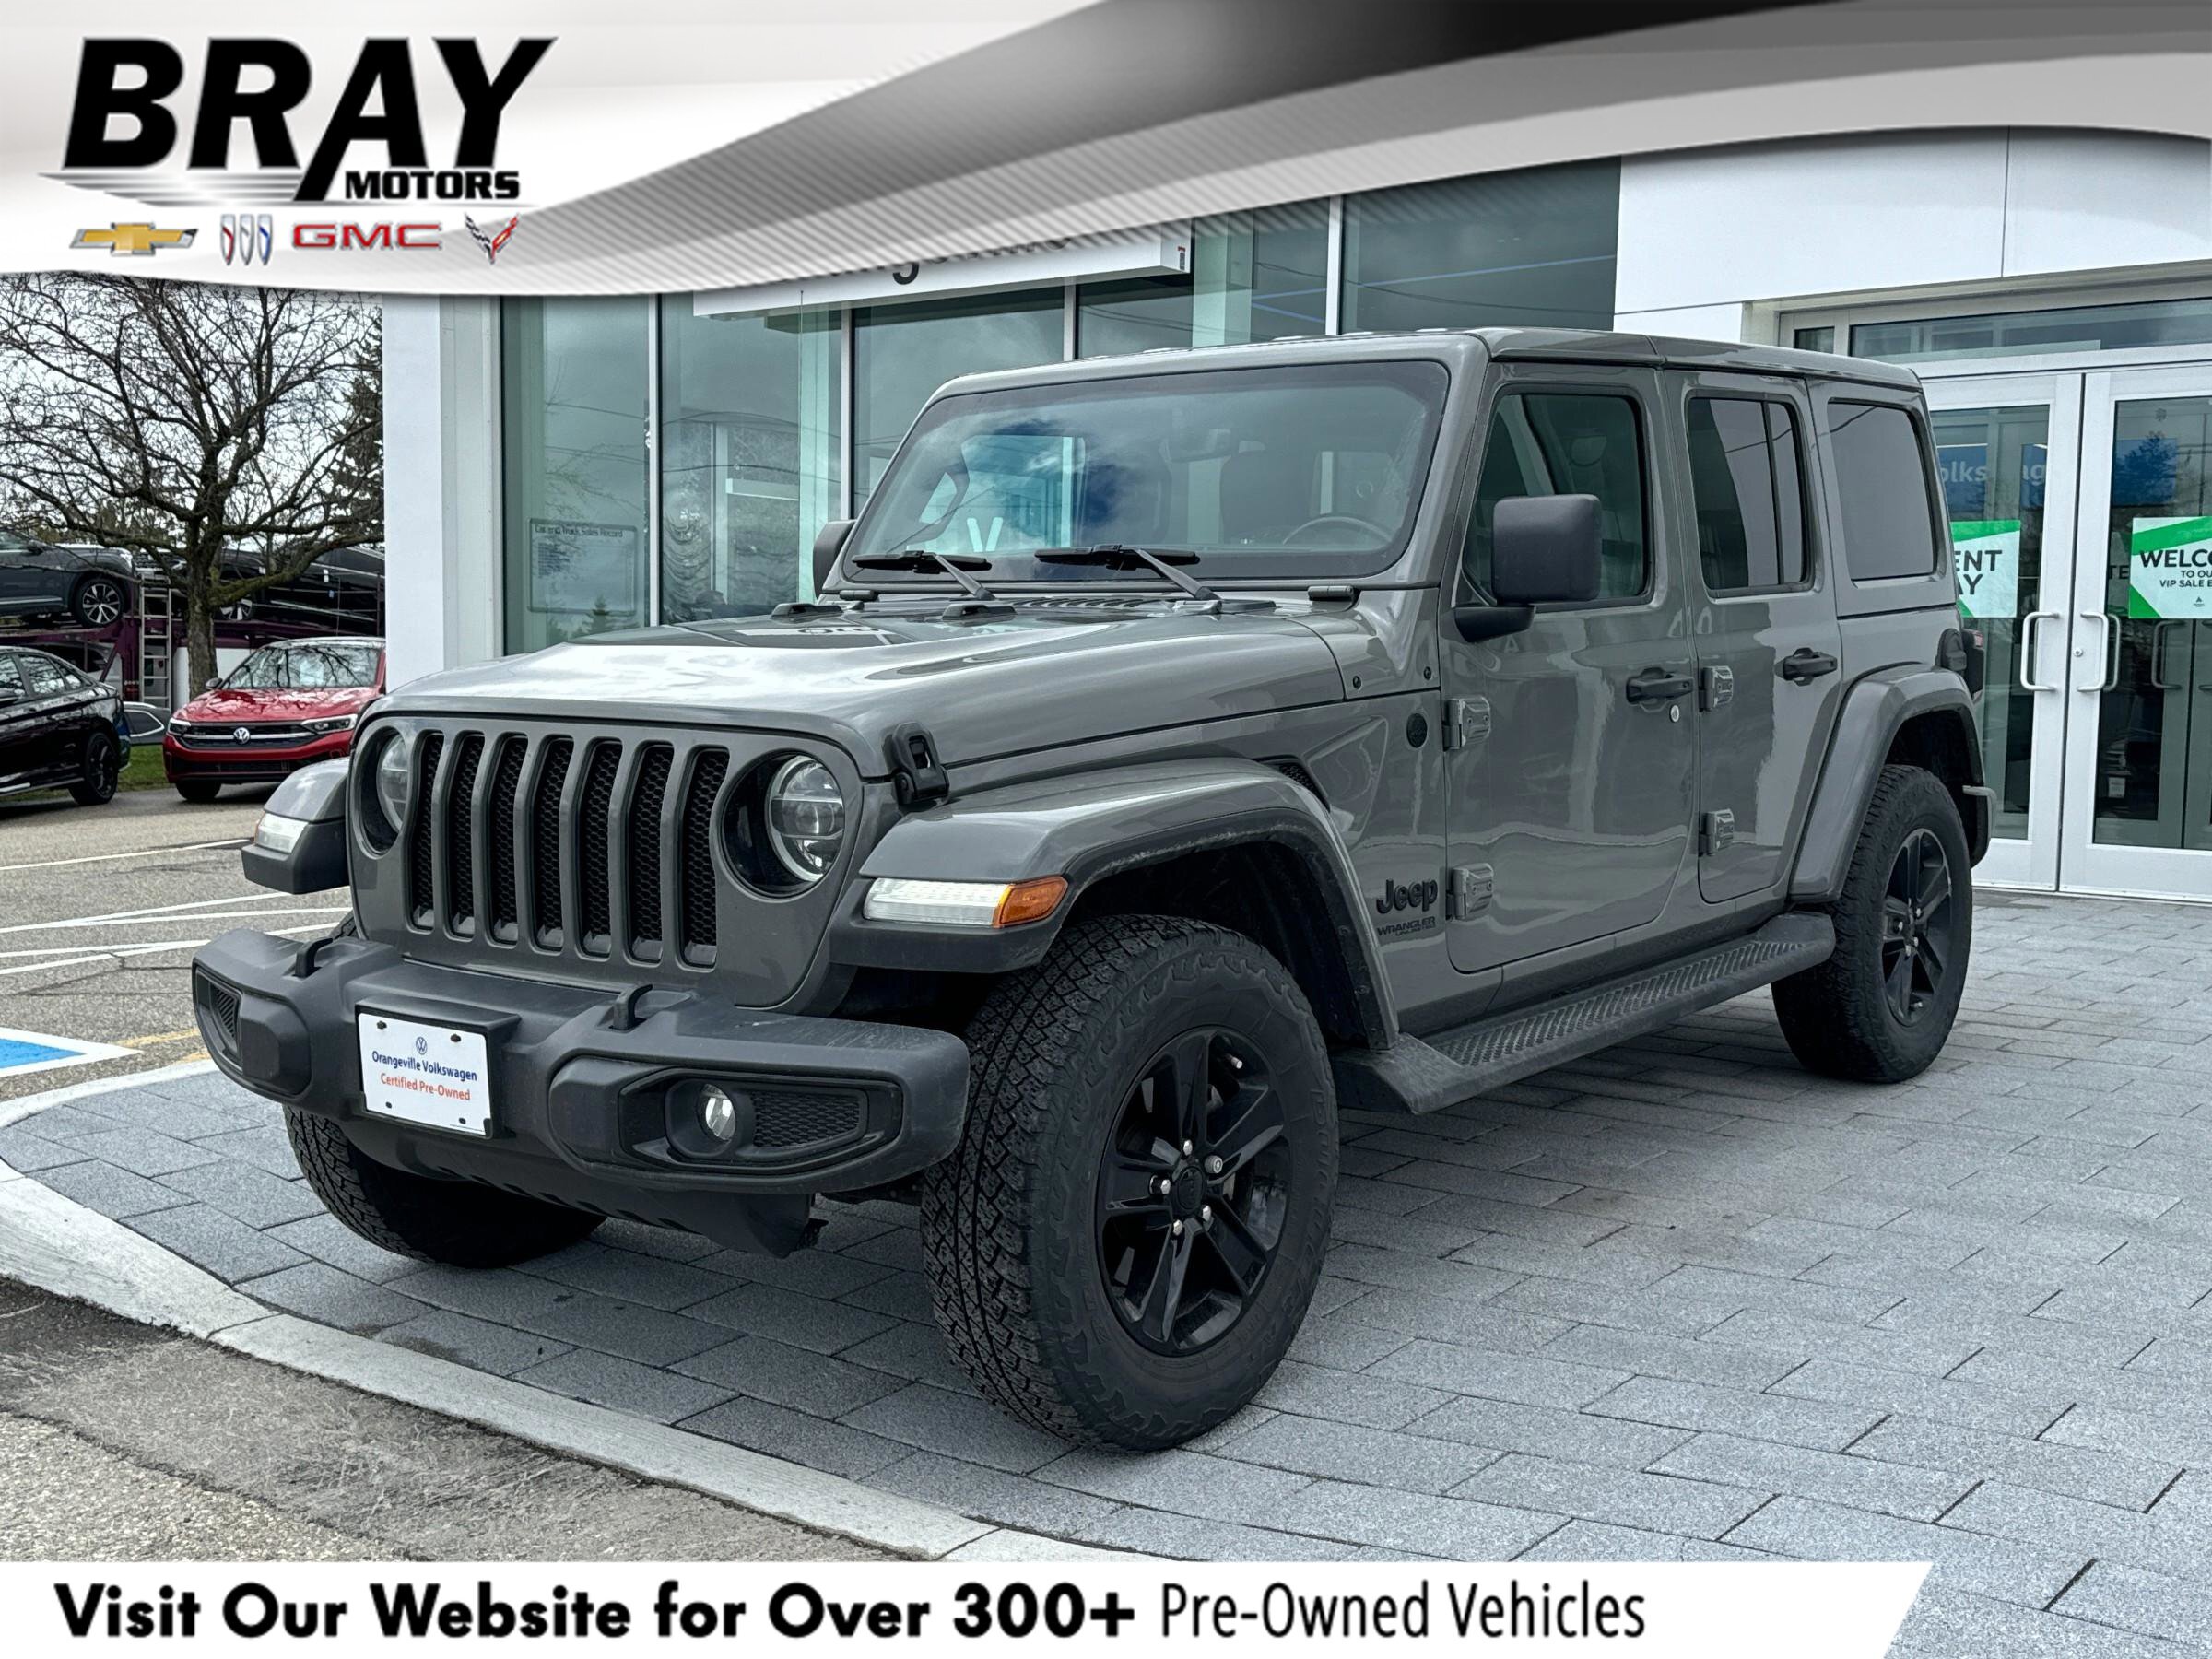 2021 Jeep Wrangler Unlimited AltitudeTWO ROOFS, 2.0L, ONE-OWNER, LEAT